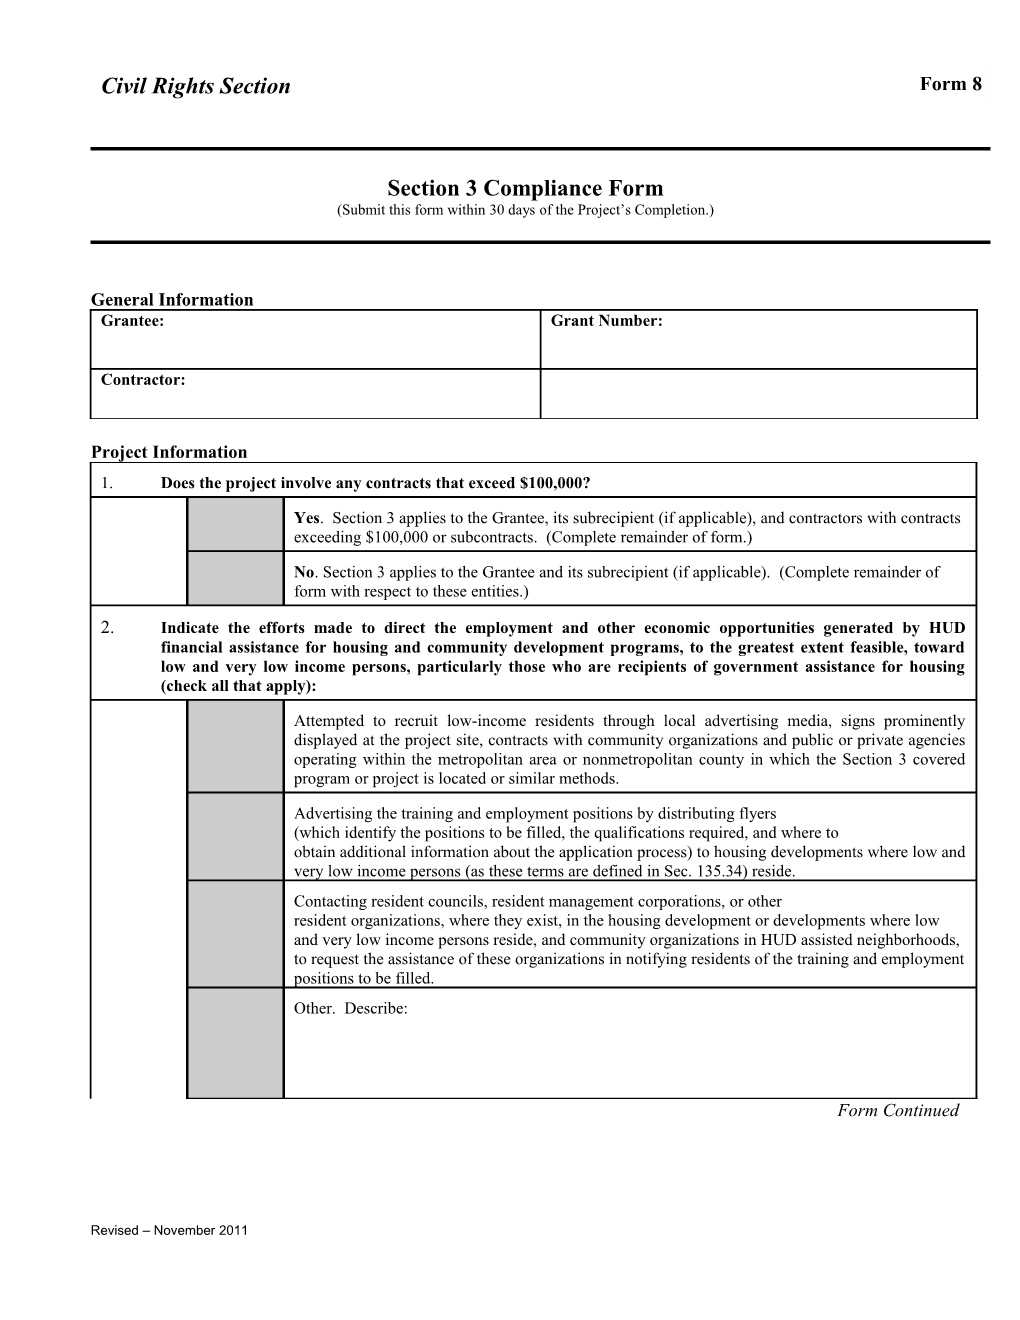 Section 3 Compliance Form